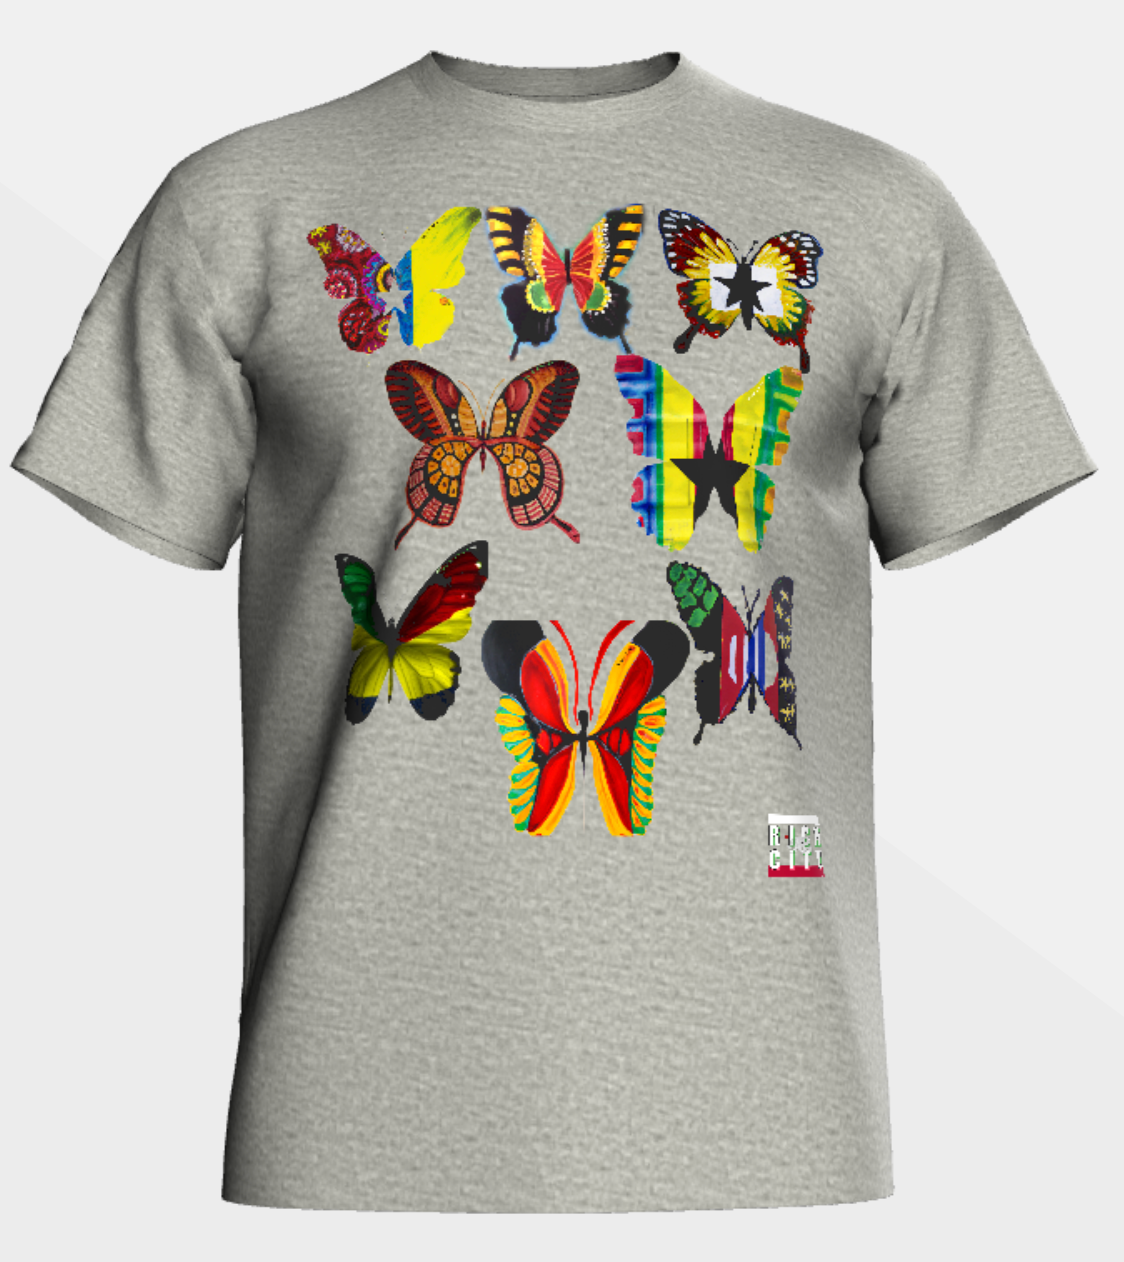 "Evry1's Brand" RichCity -"The Butterfly Effect"- Sustainable Clothing Collection